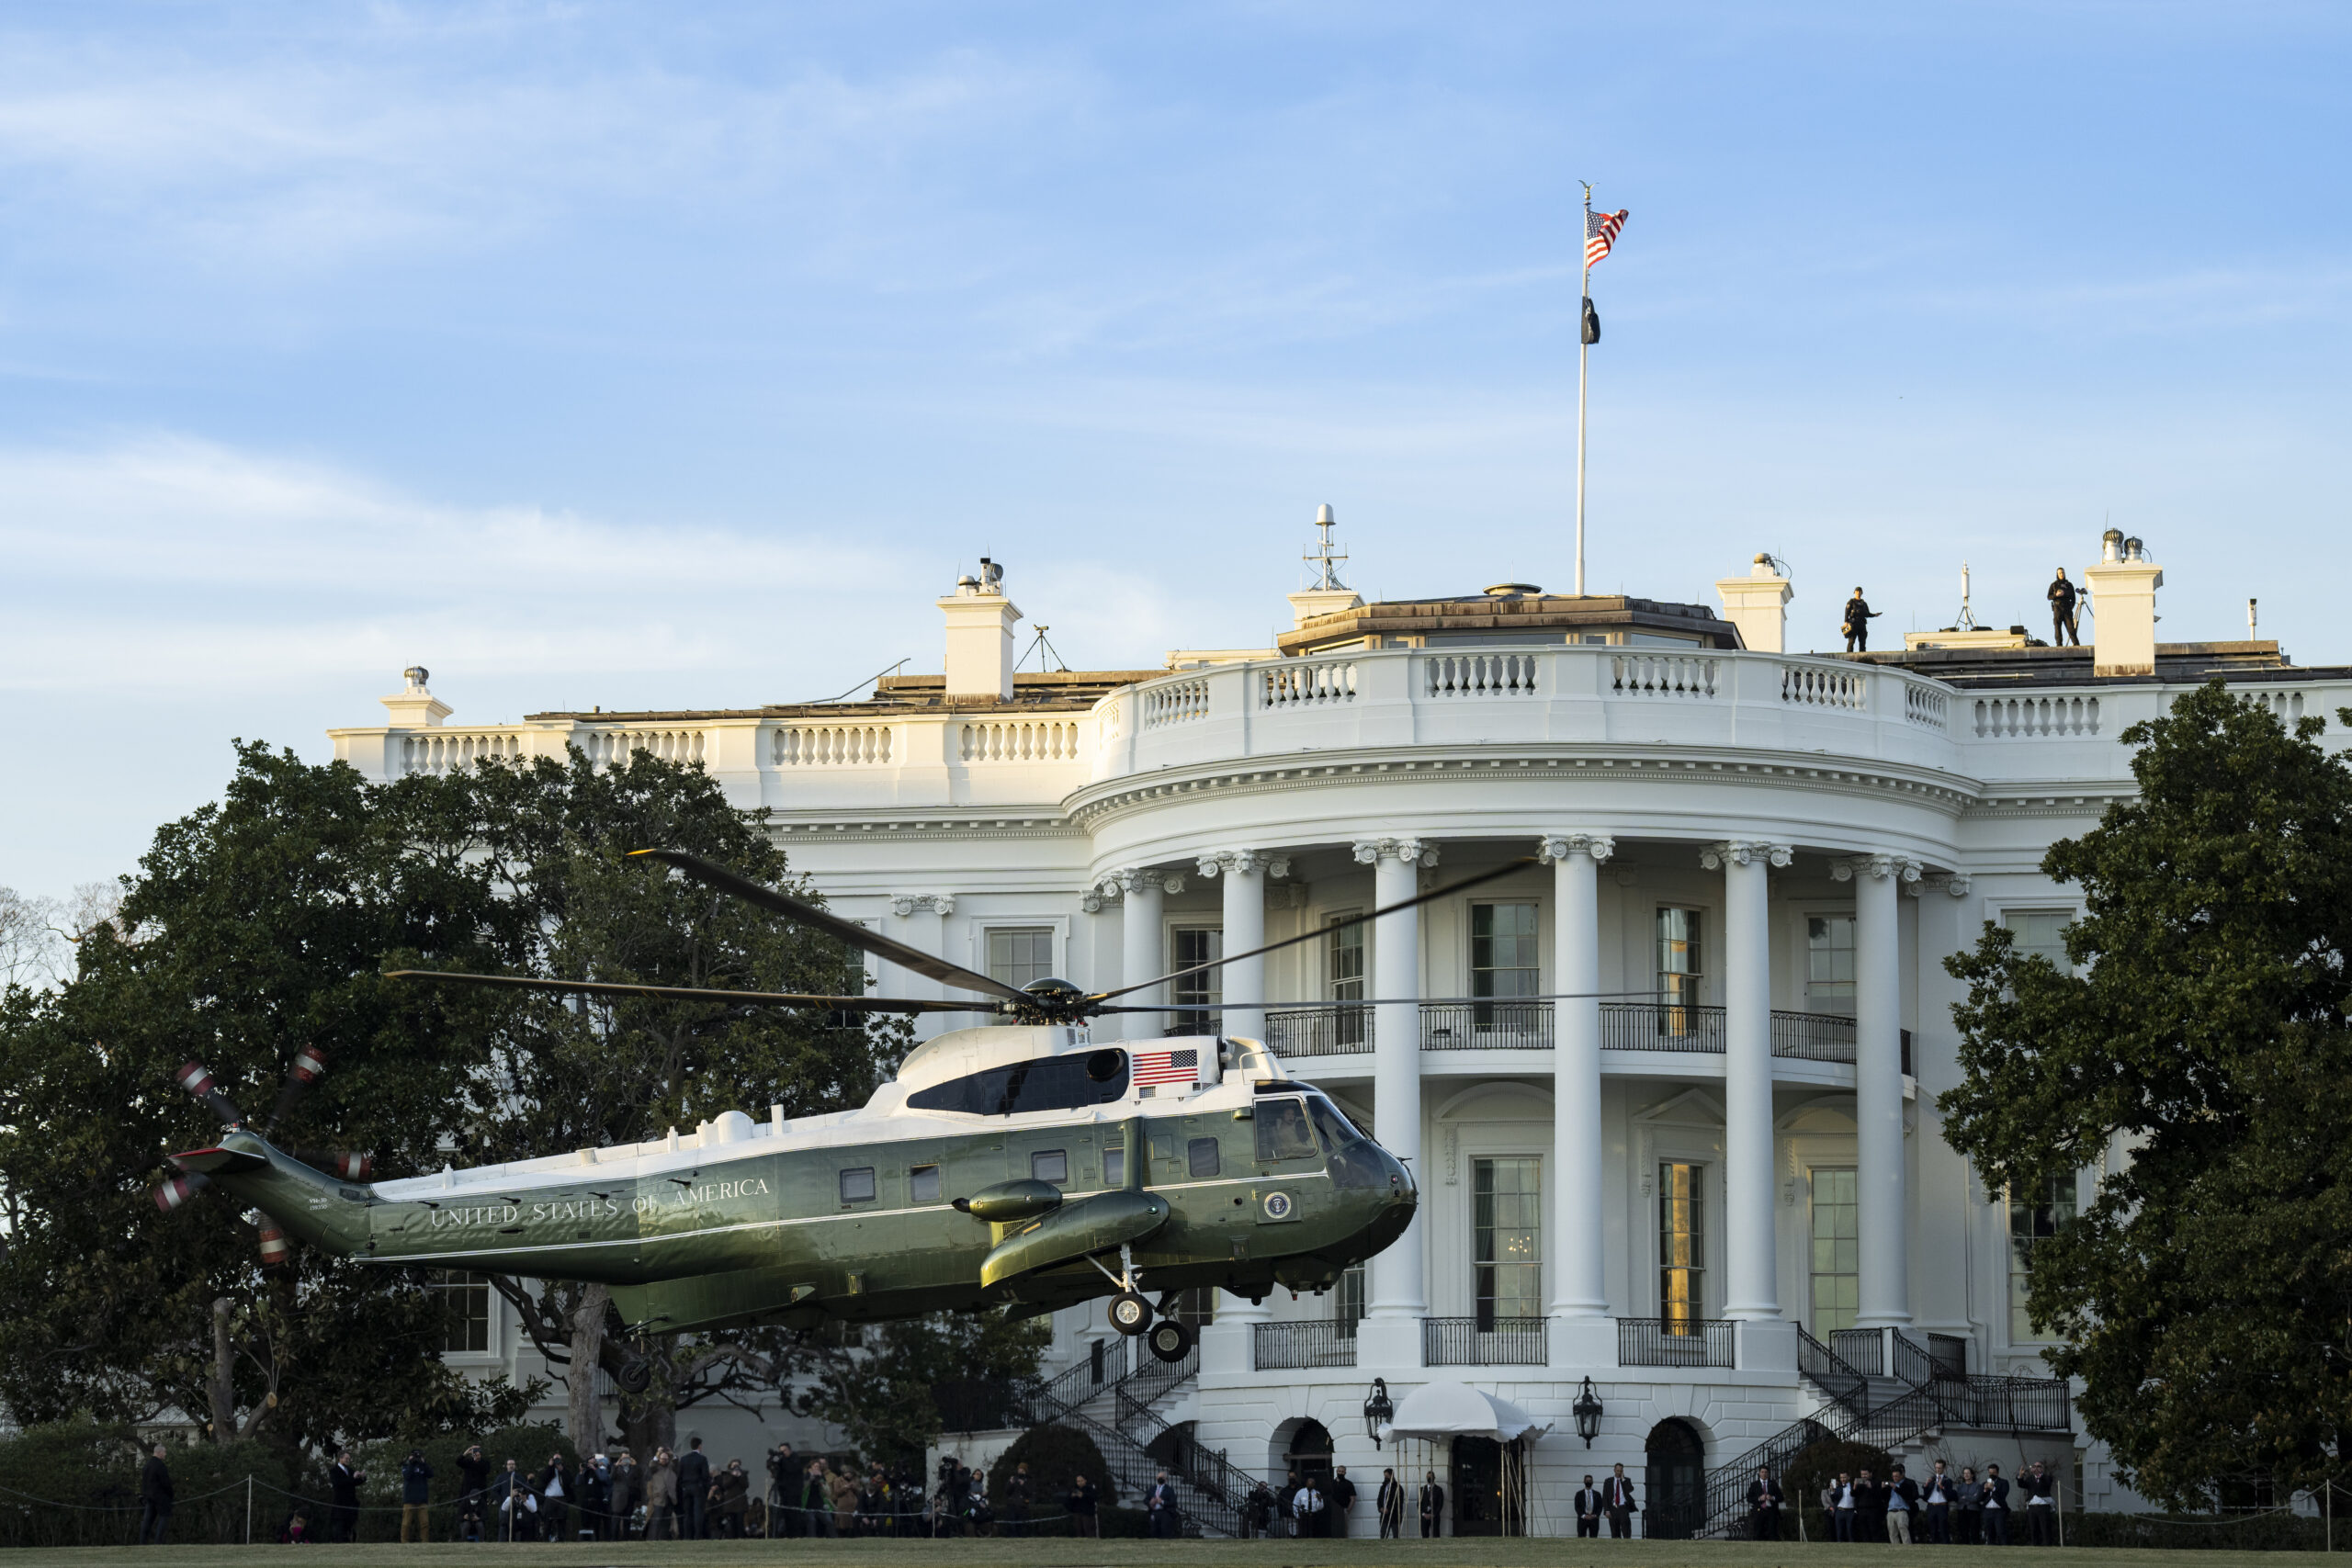 Marine One departs the White House